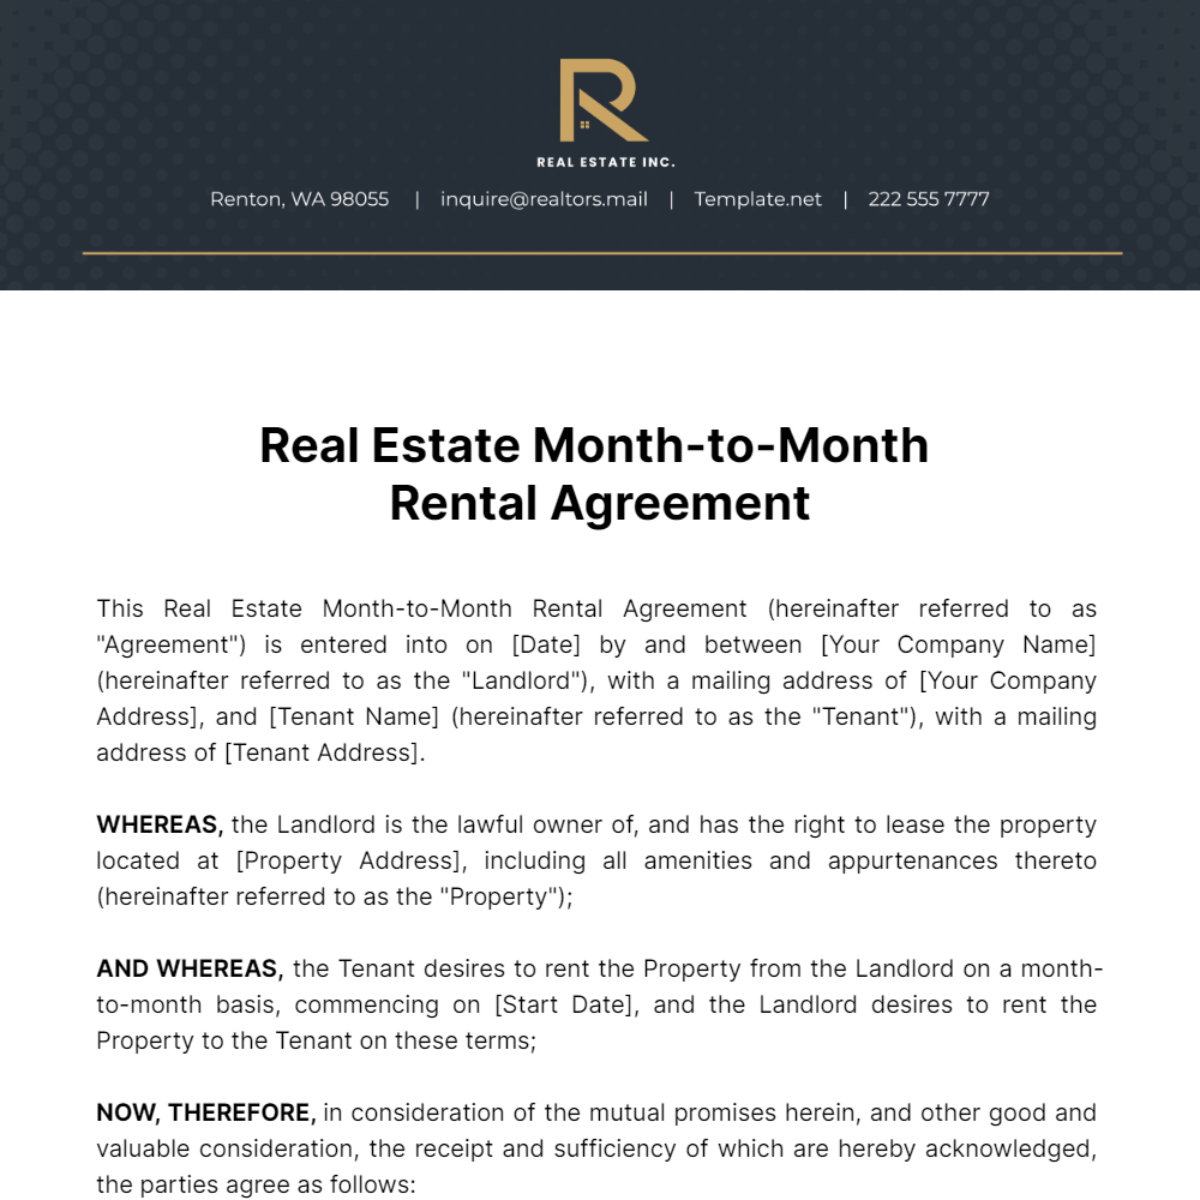 Real Estate Month-to-Month Rental Agreement Template